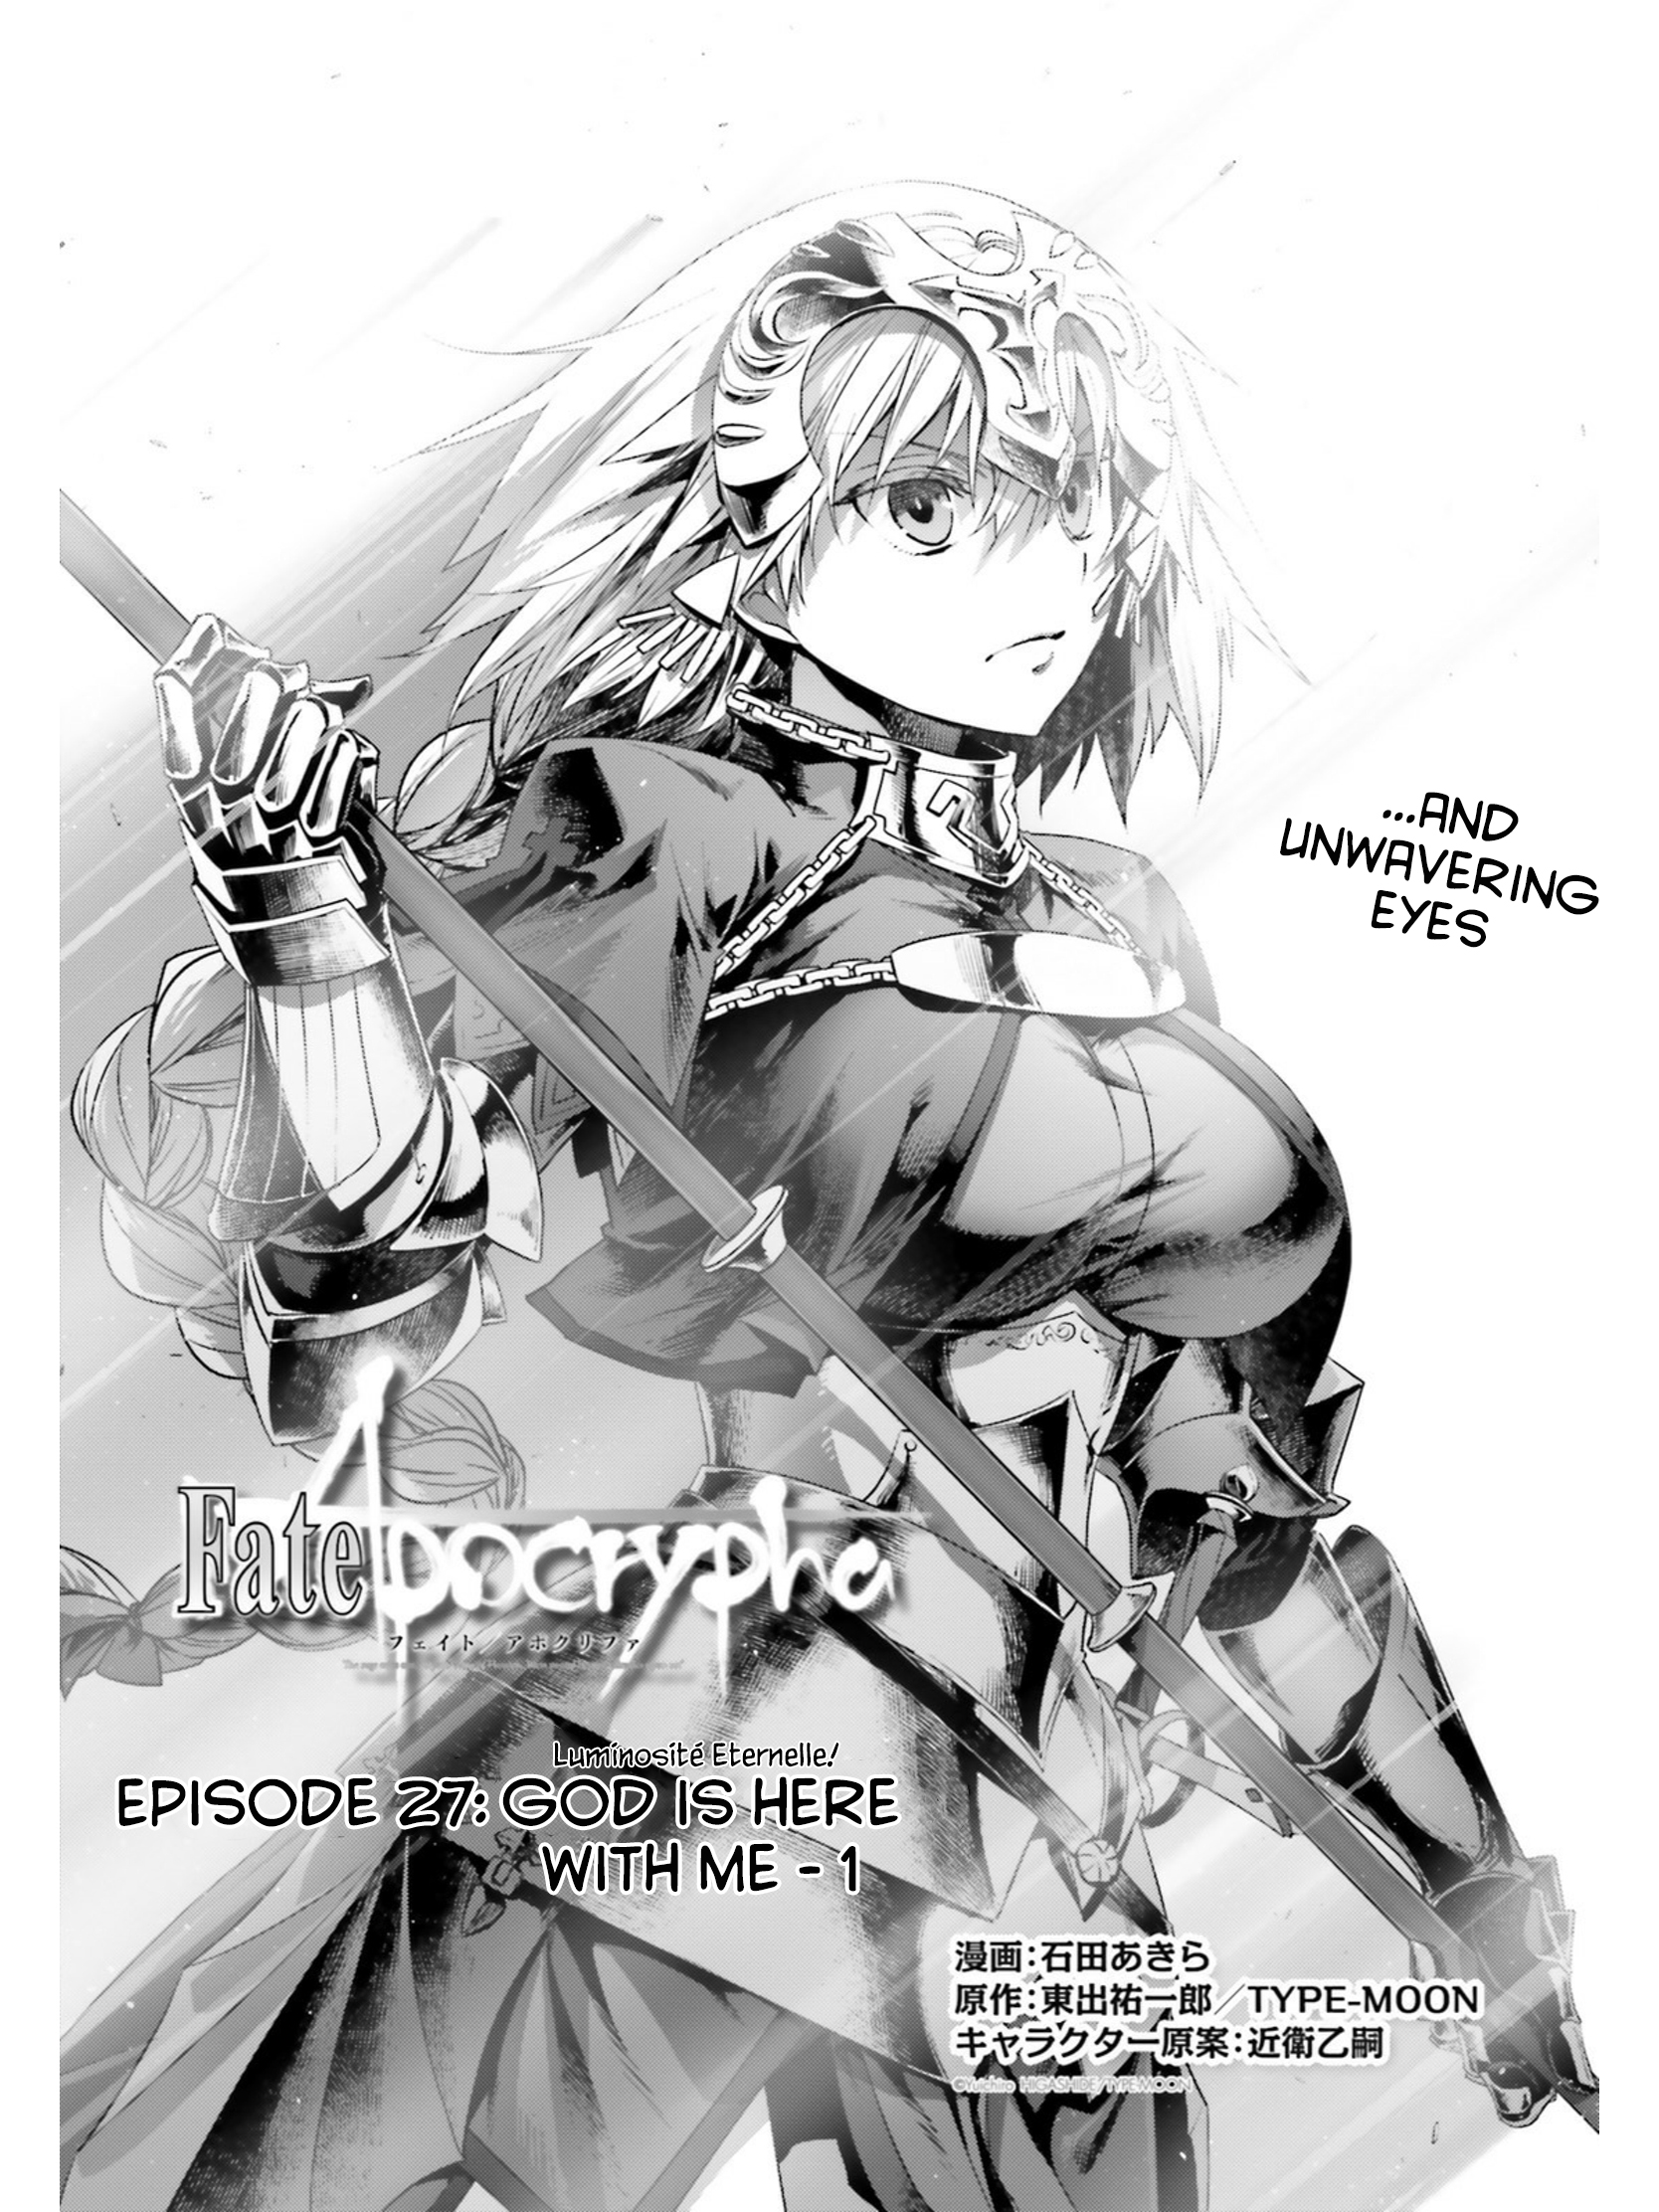 Fate/apocrypha Vol.7 Chapter 27: Episode 27 Luminosité Eternelle 1 - Picture 2